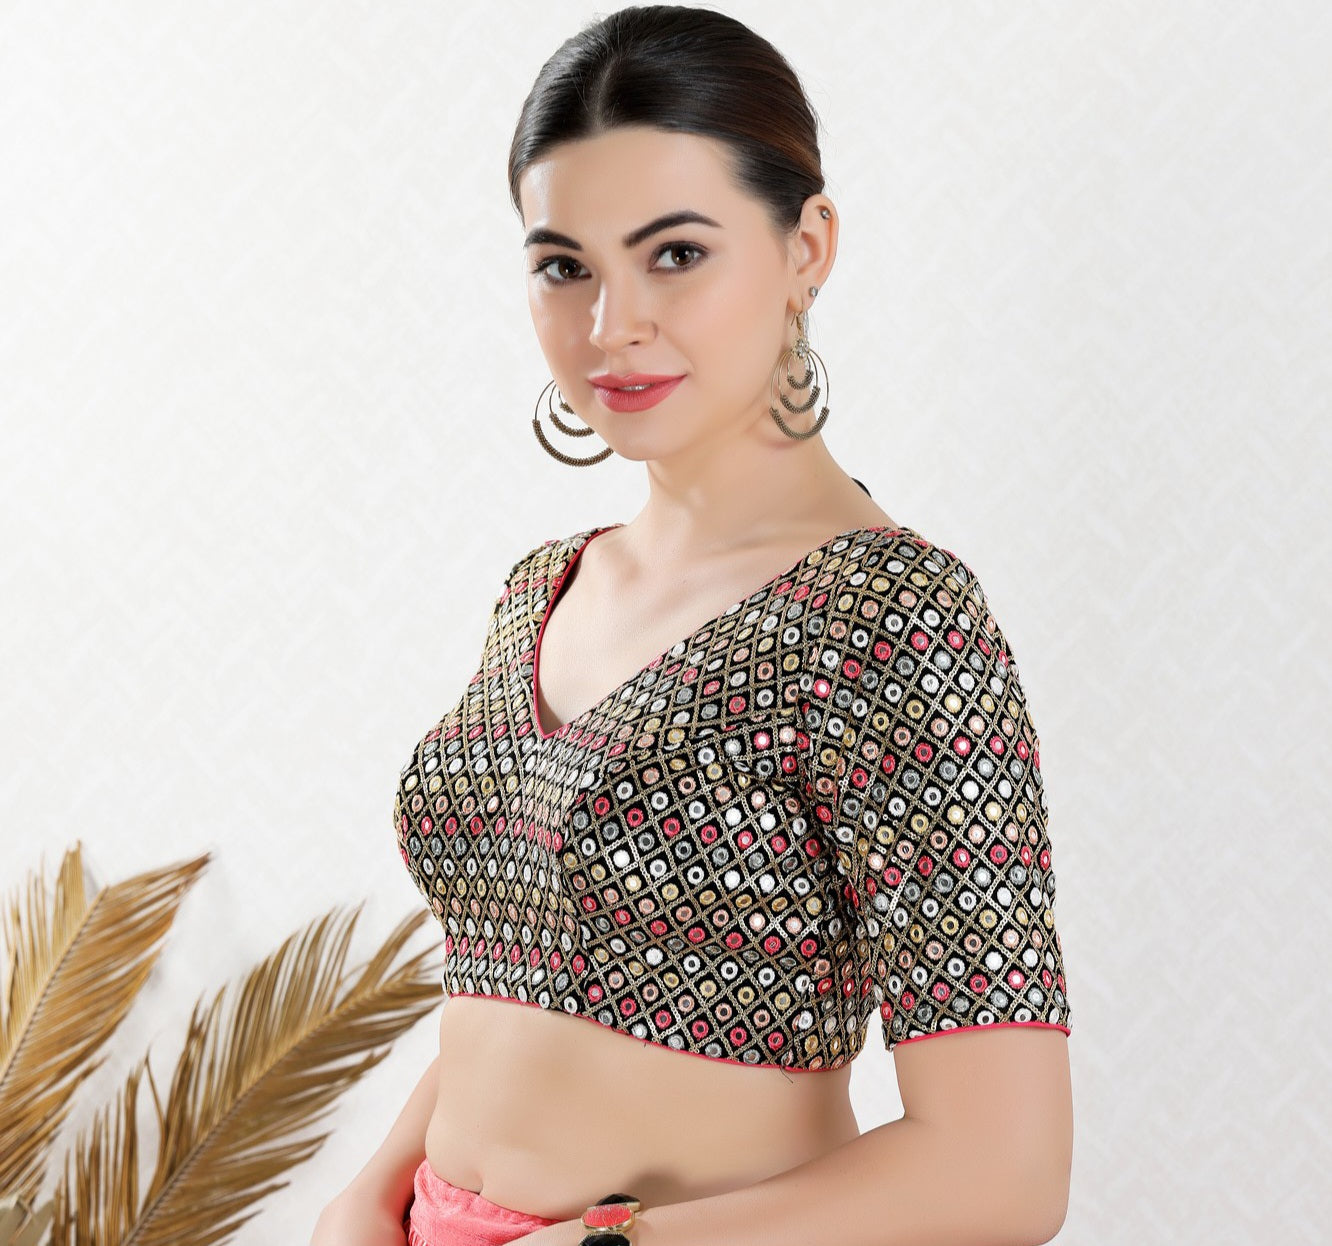 Georgette Saree Blouse and Crop Top : Exquisite embroidery